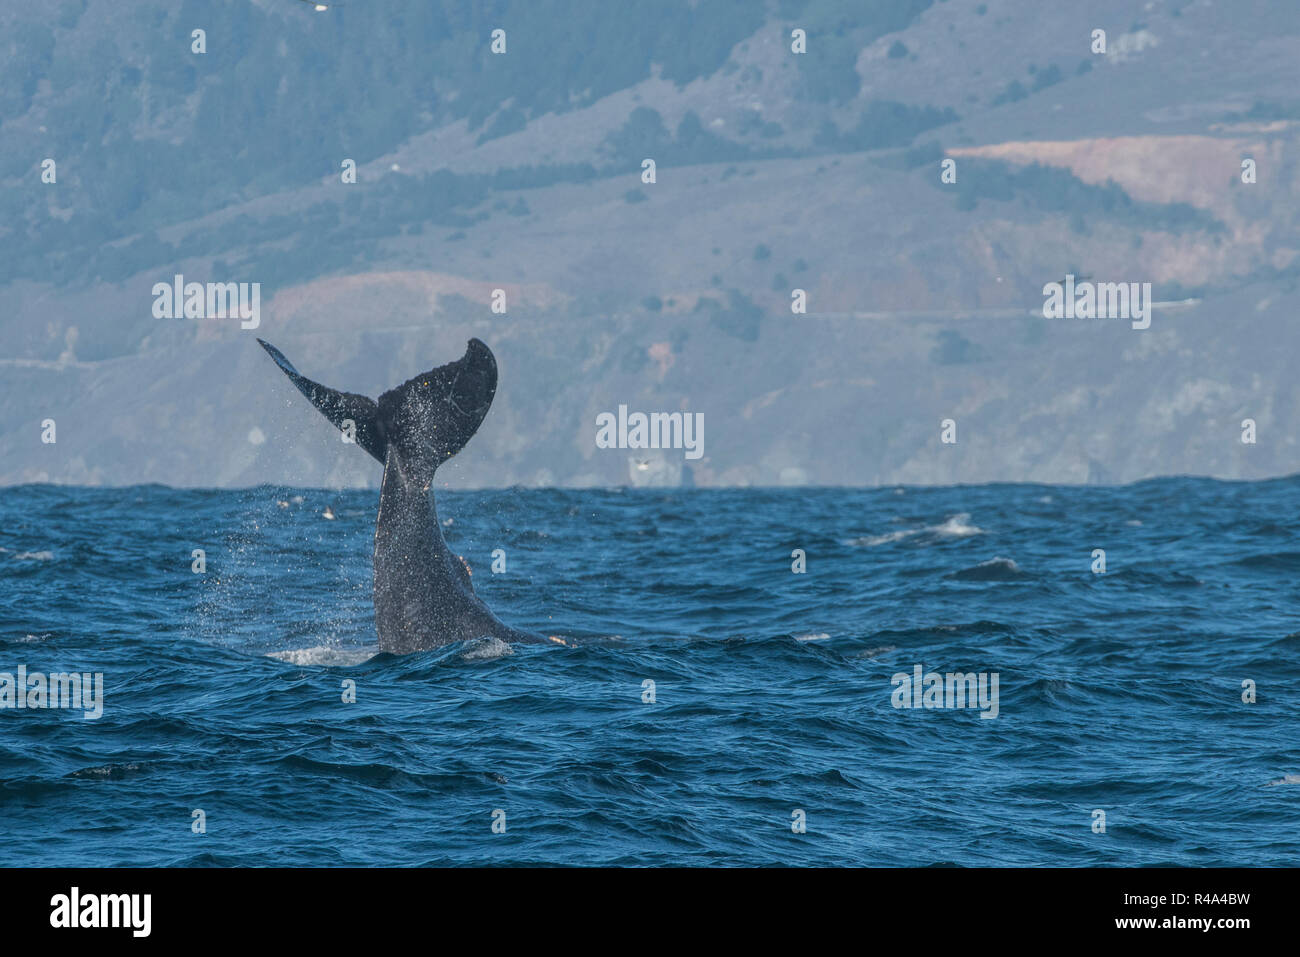 A humpback whale engaging in tail slapping behavior or lobtailing, a form of communication, off the coast of California. Stock Photo